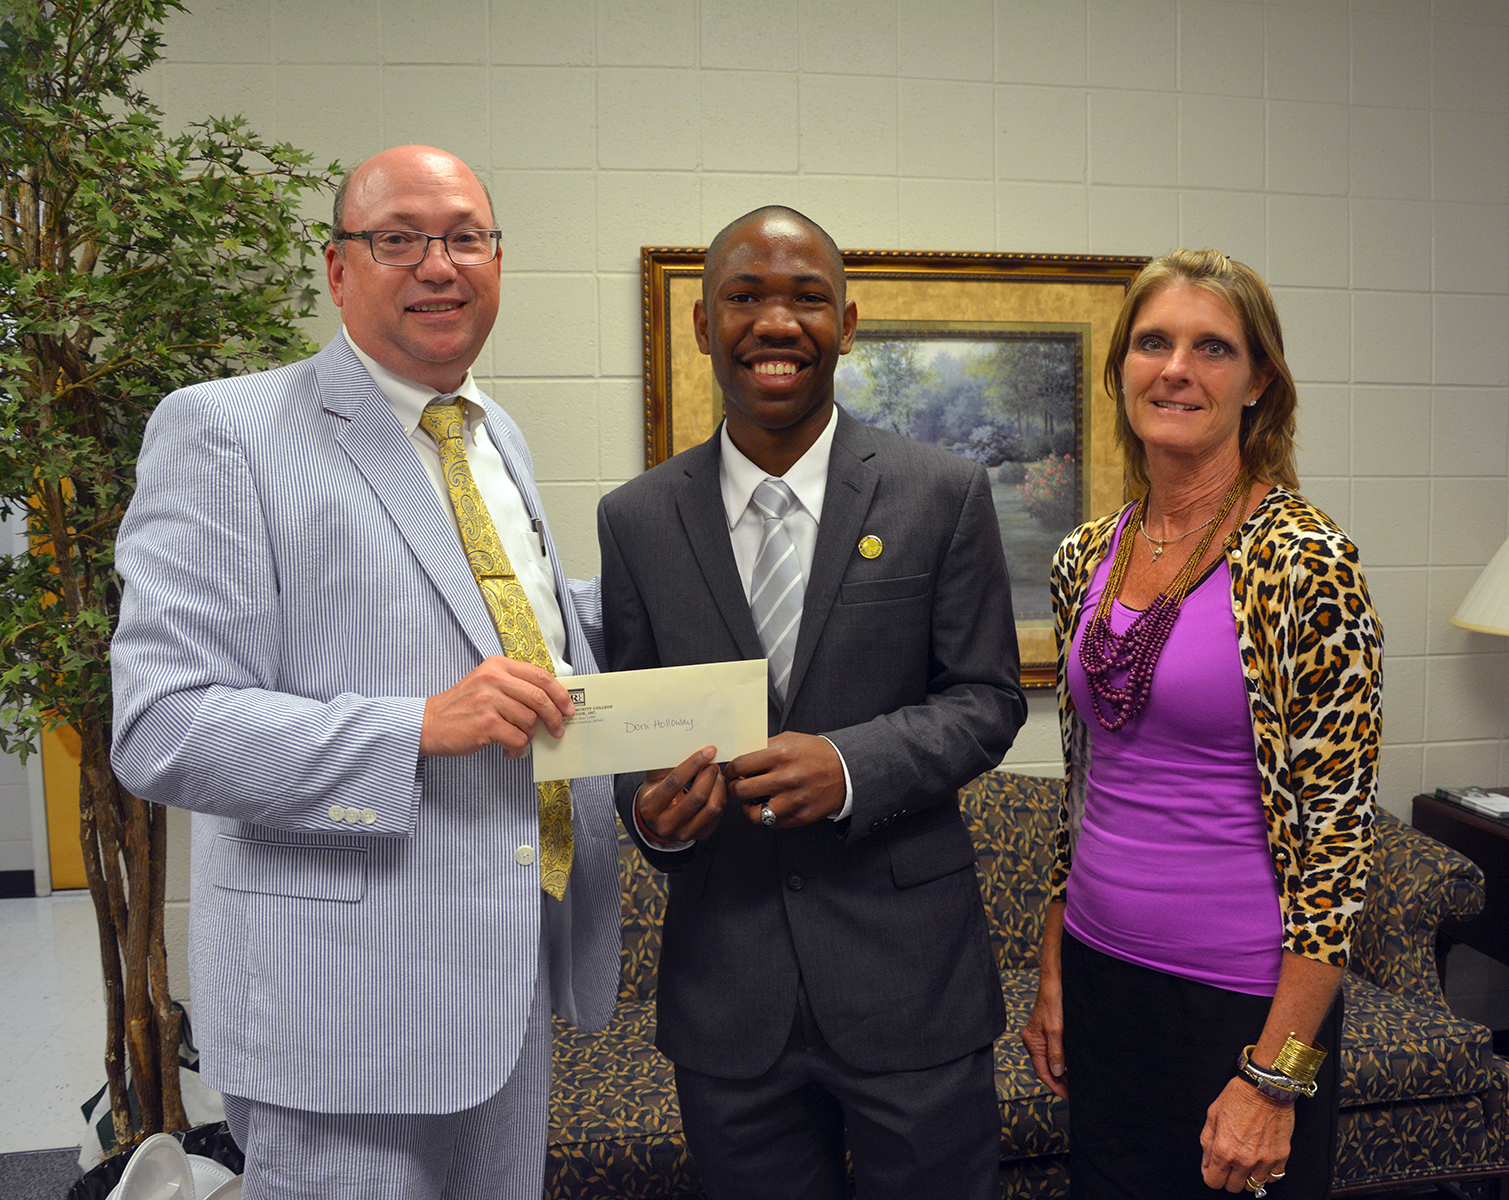 Doni Holloway, a Scotland Early College graduate, won first place in a Richmond Community College essay contest. He is congratulated by RCC President Dr. Dale McInnis and Board of Trustees Chair Claudia Robinette as he accepts his cash prize of $100.